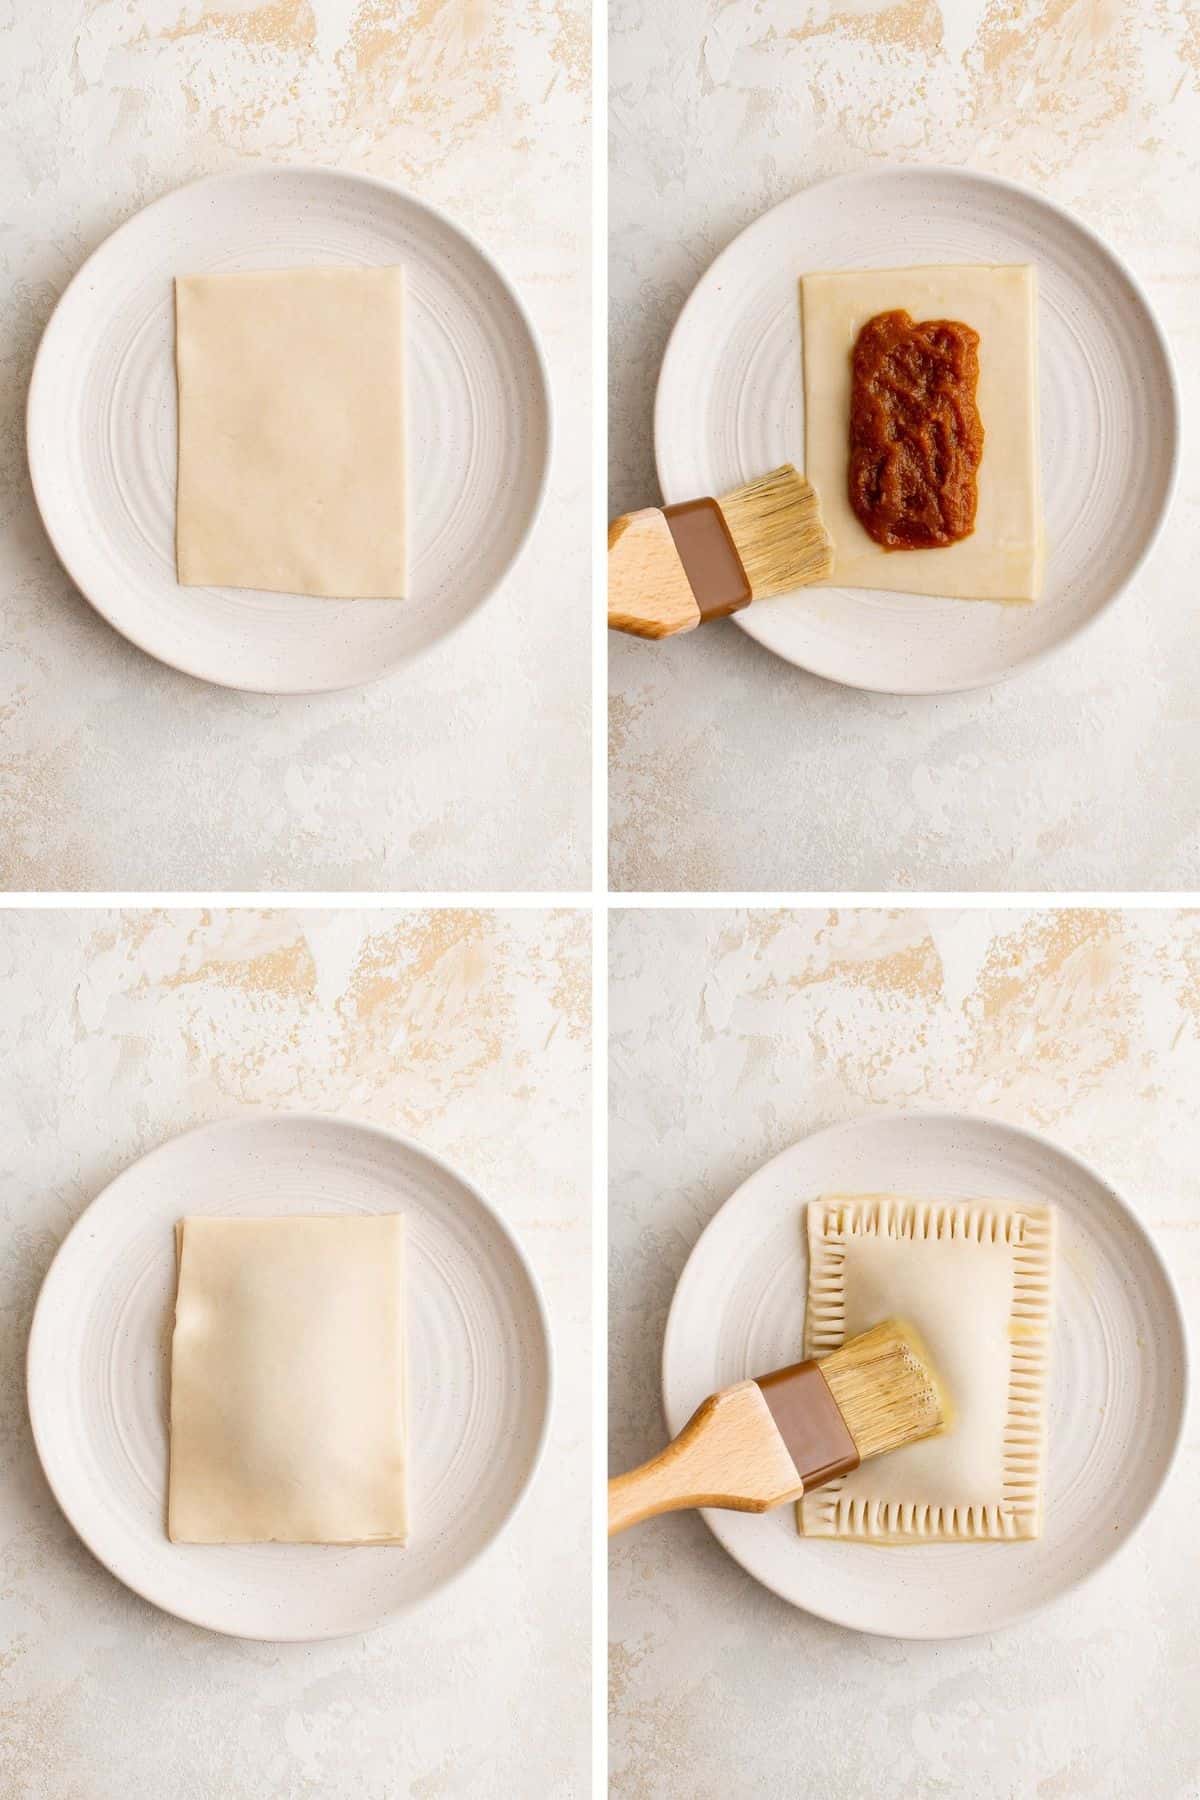 4 steps to filling and sealing a pop tart.